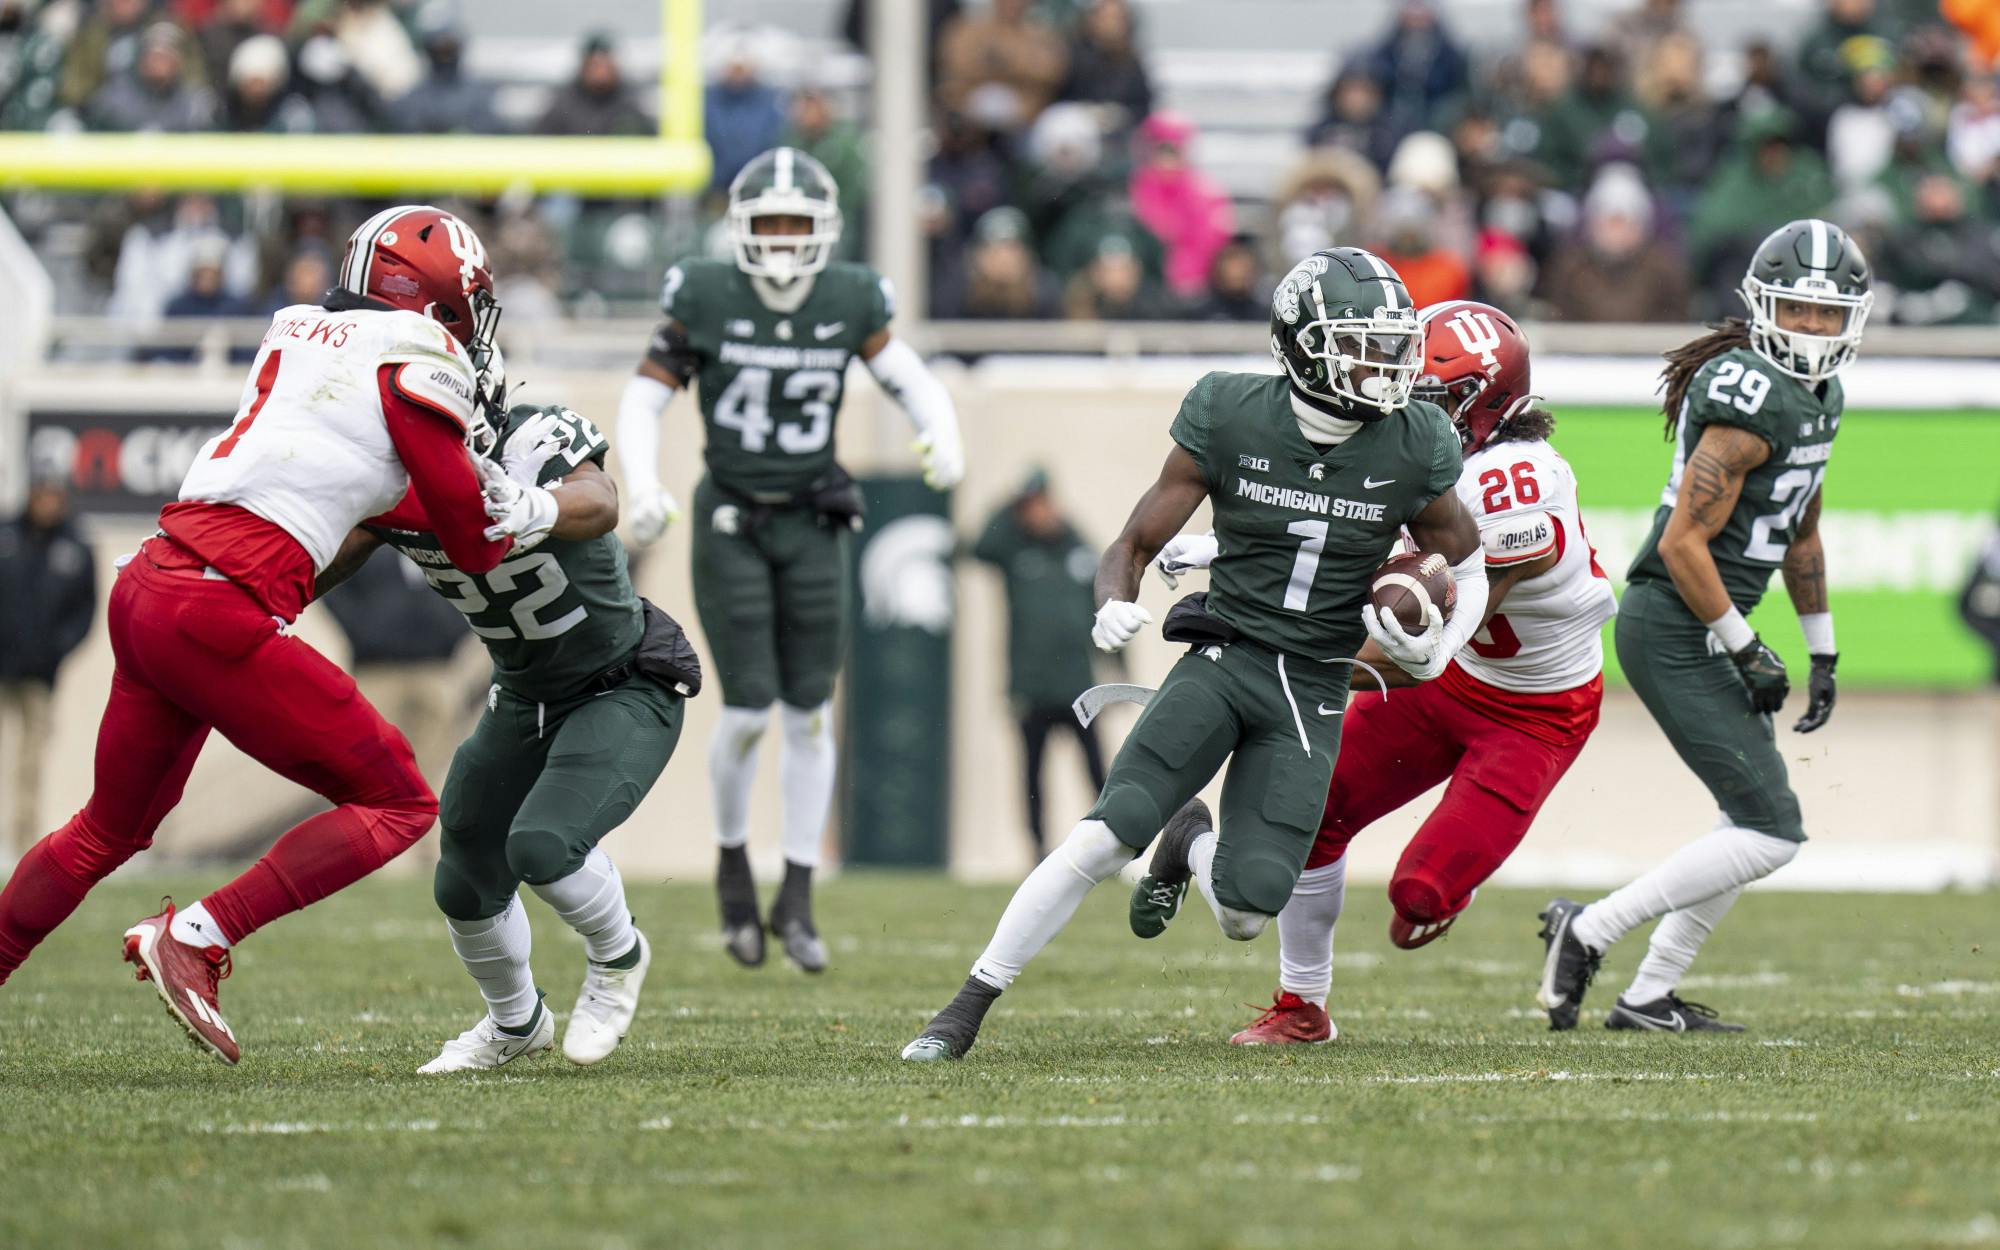 Redshirt senior Jayden Reed, 1, breaks through the Hoosier defense during Michigan State’s last game at home against Indiana on Saturday, Nov. 19, 2022 at Spartan Stadium. Indiana ultimately beat the Spartans, 39-31.